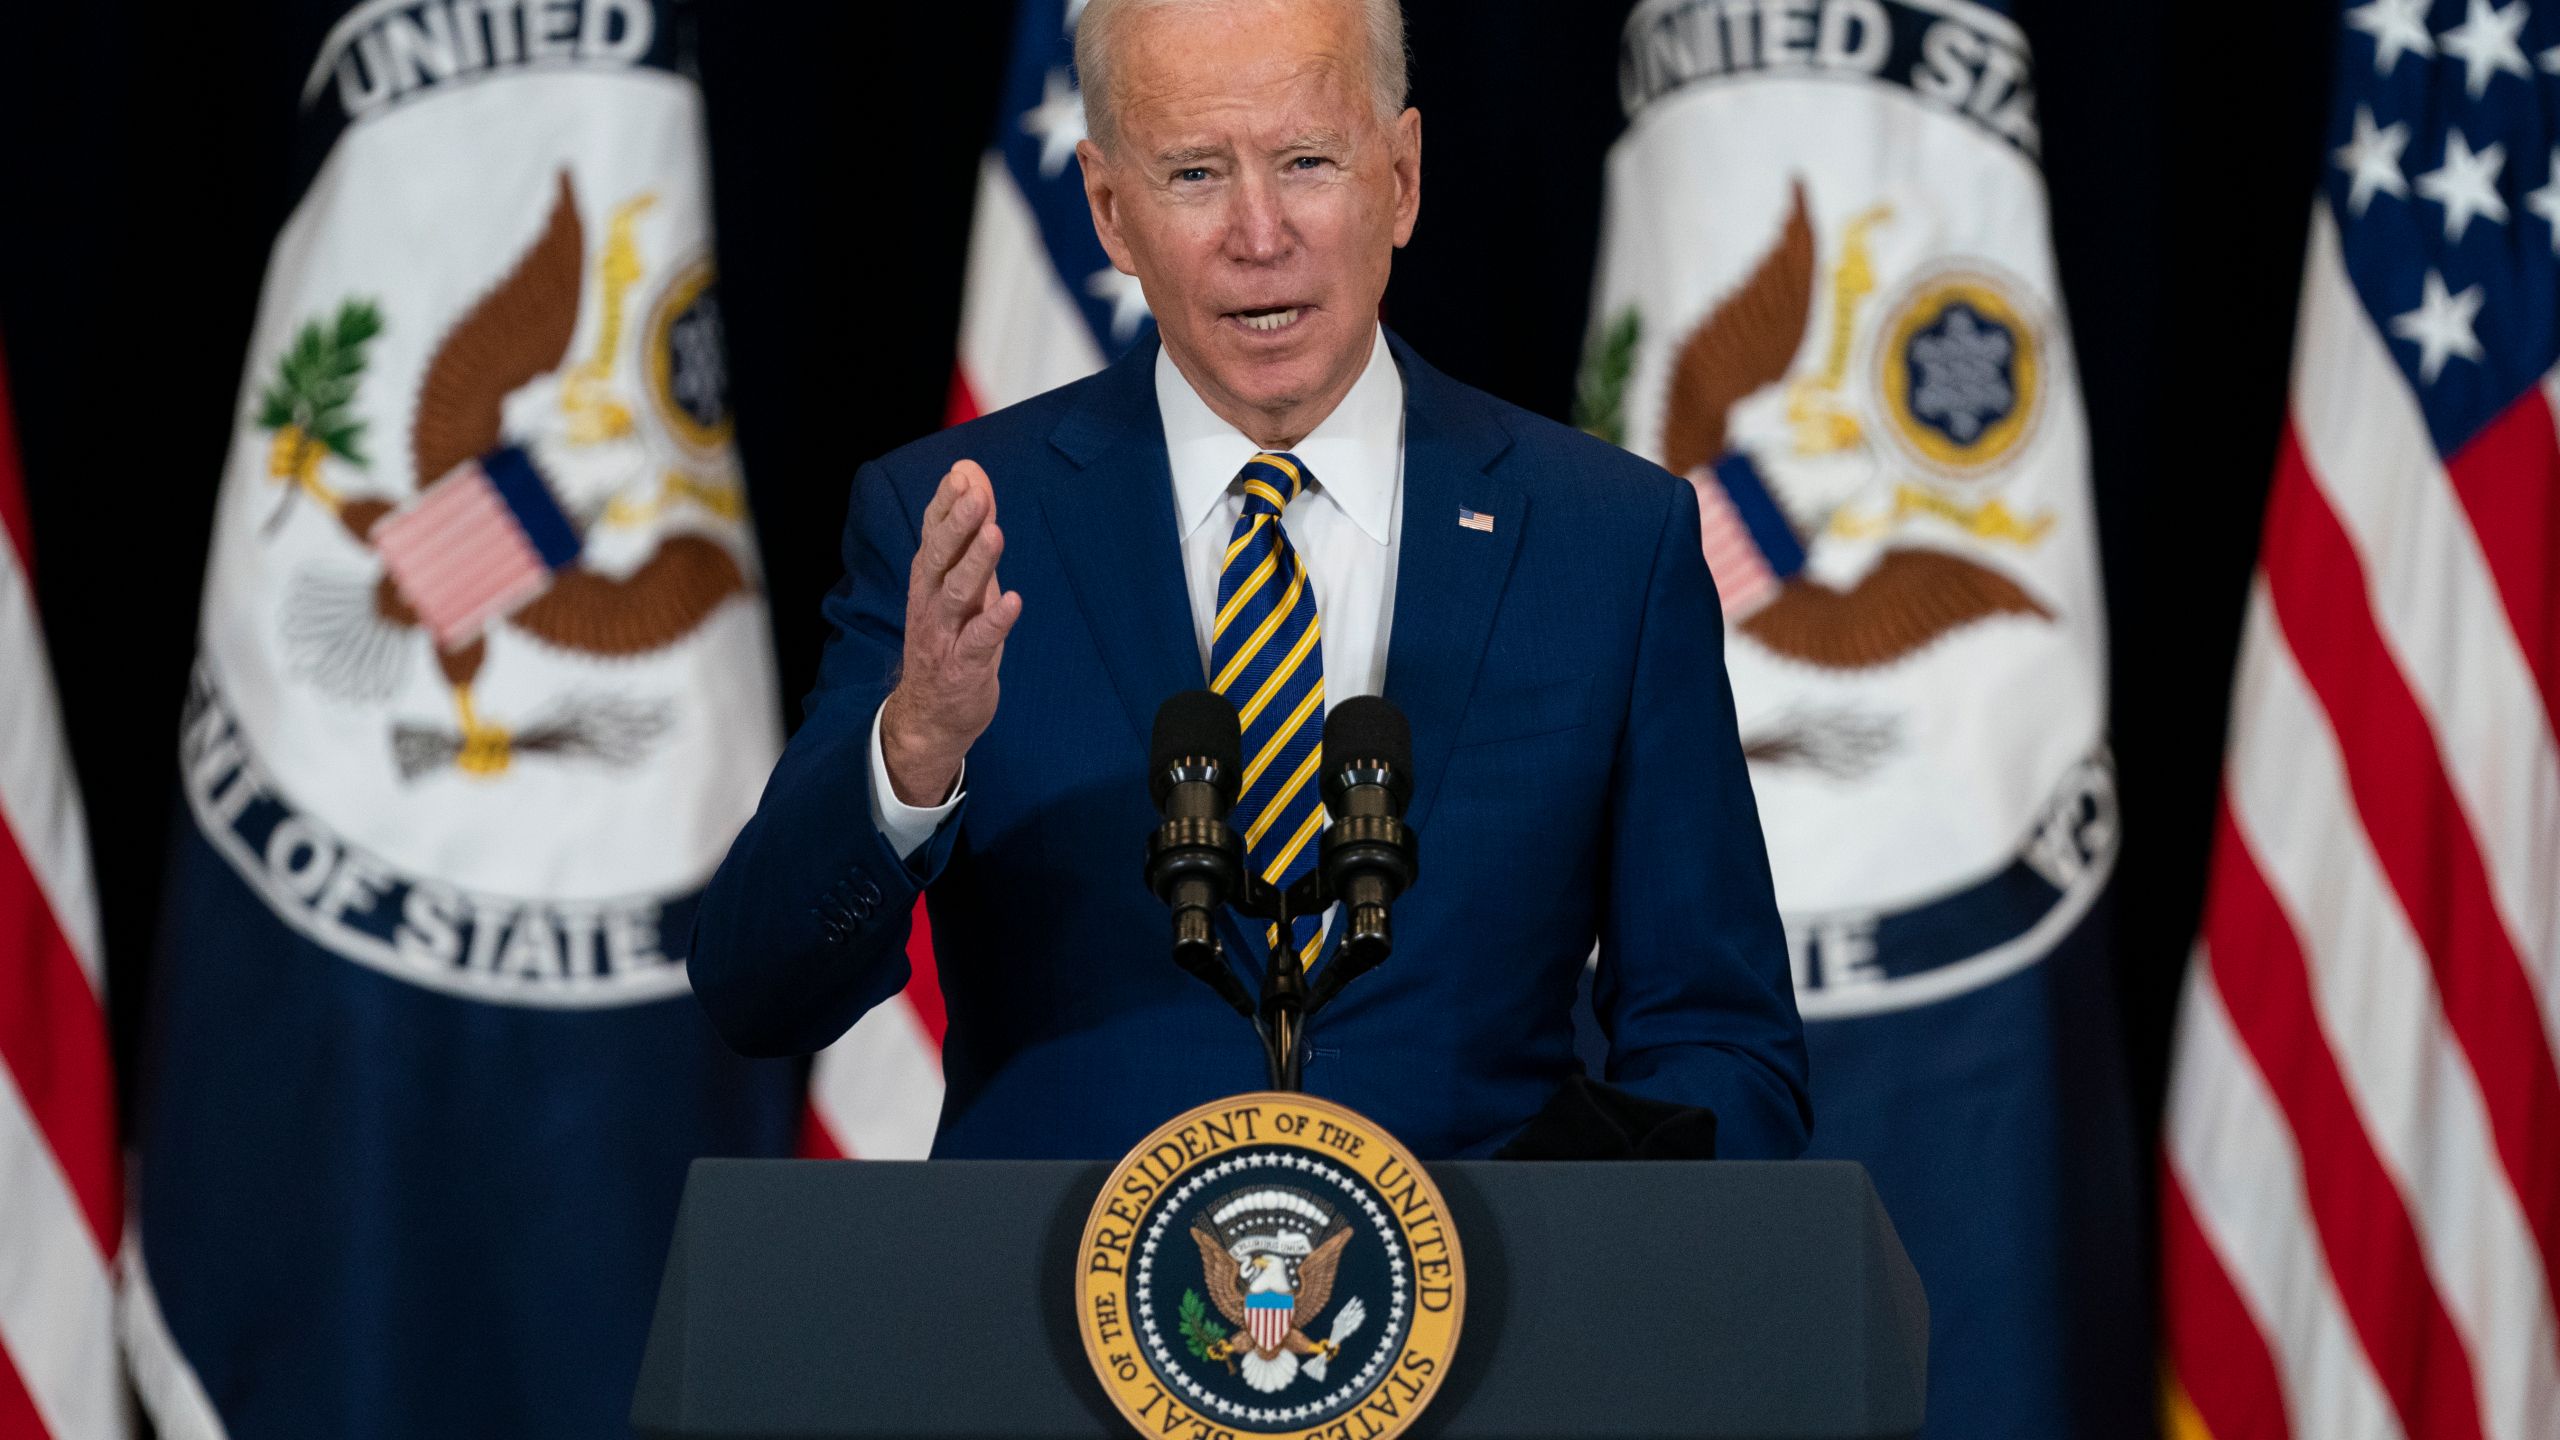 America is back': Biden says U.S. will allow more refugees, support LGBTQ rights globally and get tough on Russia